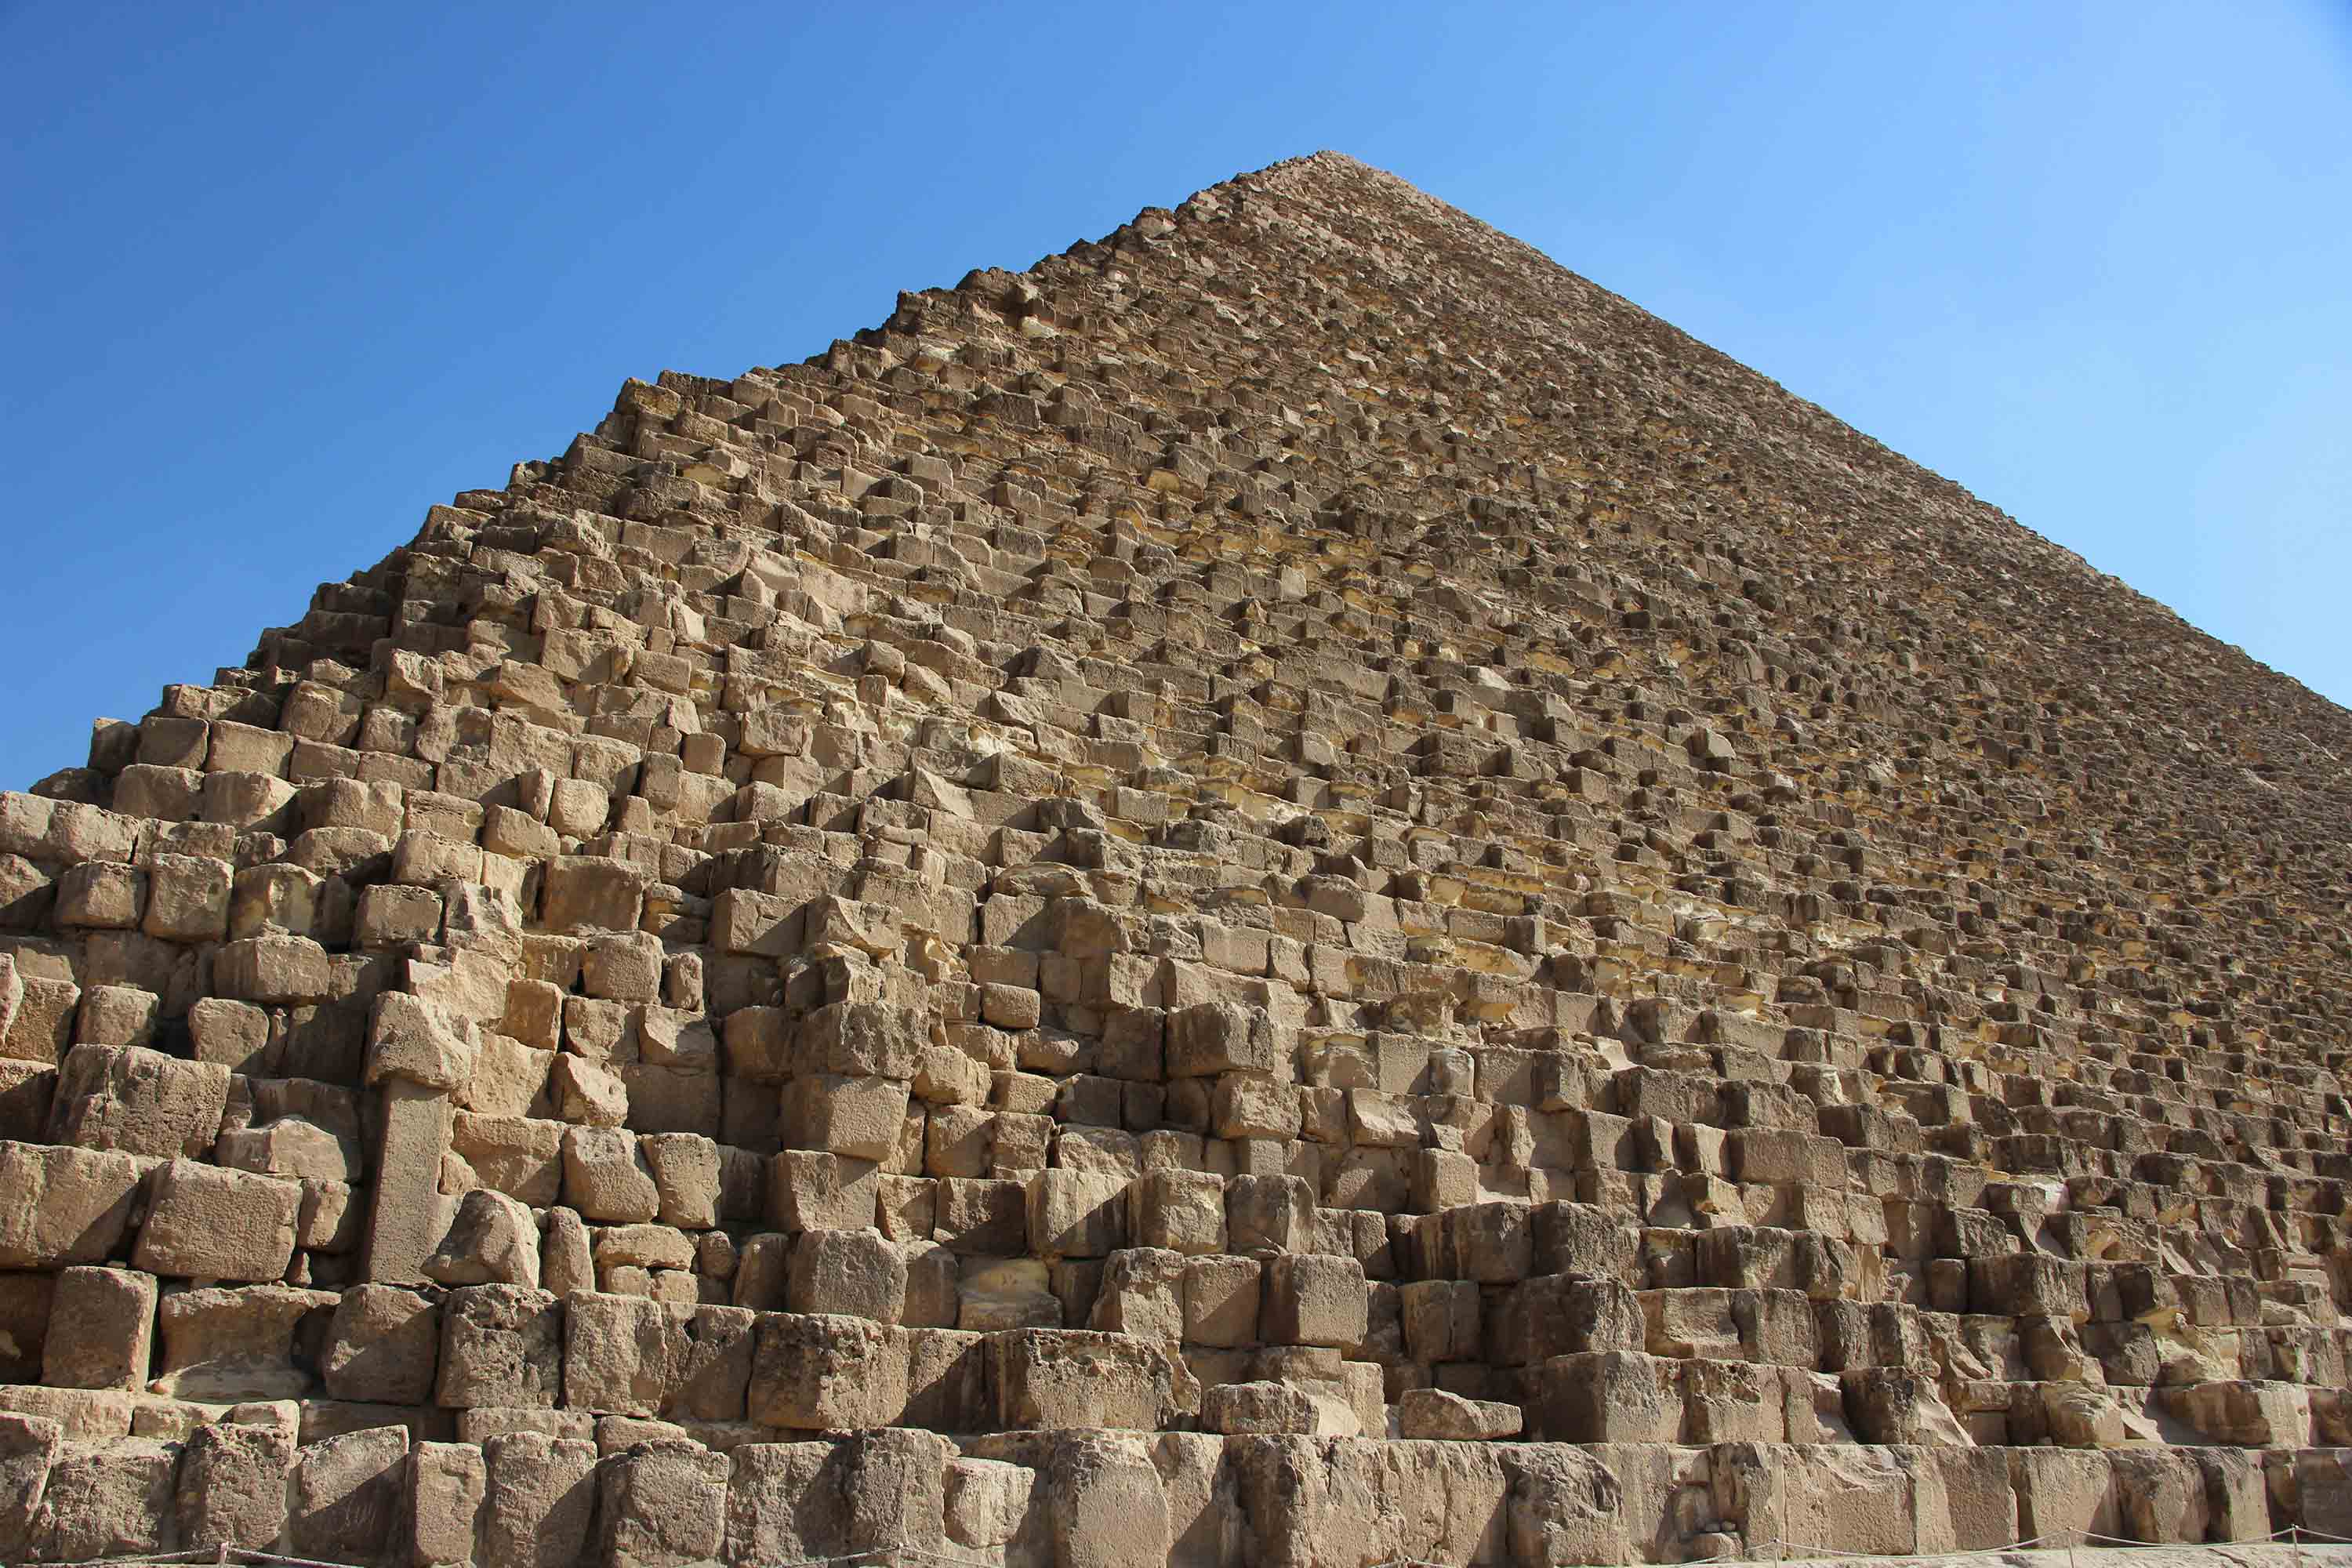 Ground level perspective looking up at the Great Pyramid of Khufu in Egypt’s Giza Pyramid Complex